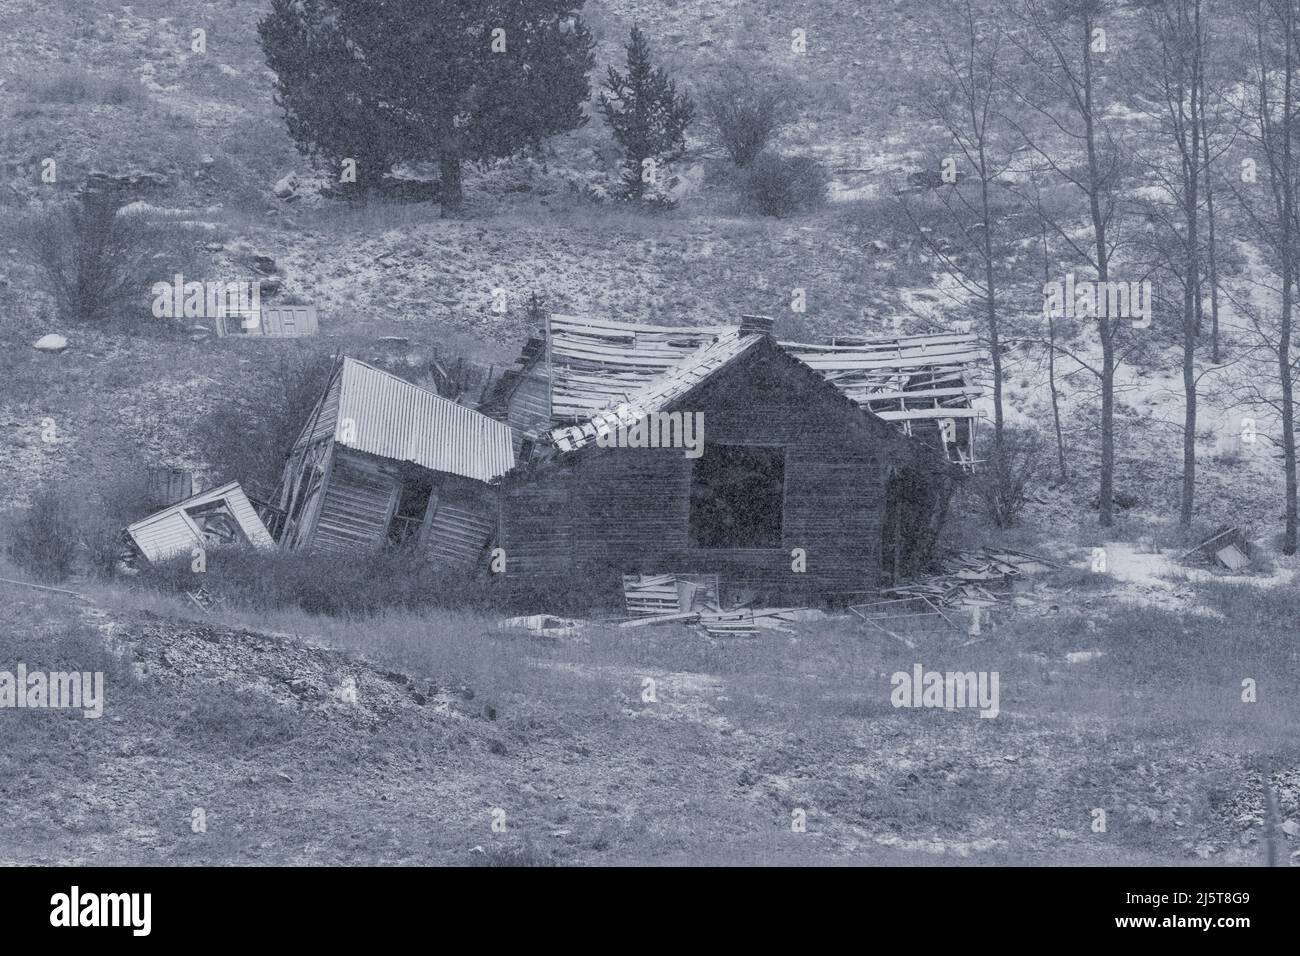 Gold mines of the Cripple Creek / Victor historic mining district on a snowy spring day Stock Photo